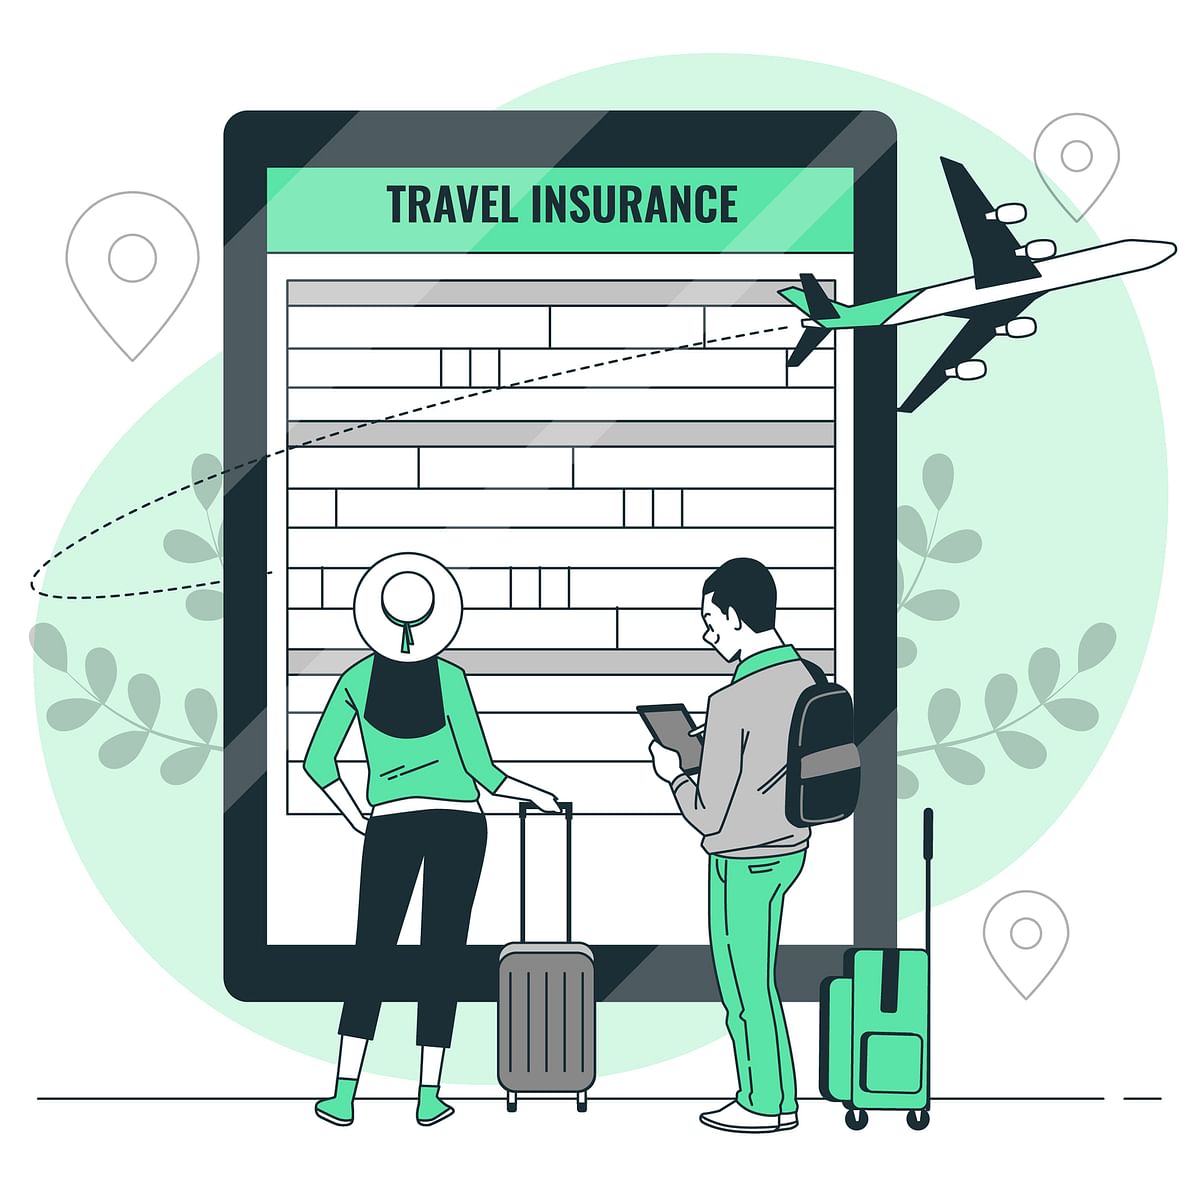 What Is Travel Insurance And What Does It Cover?